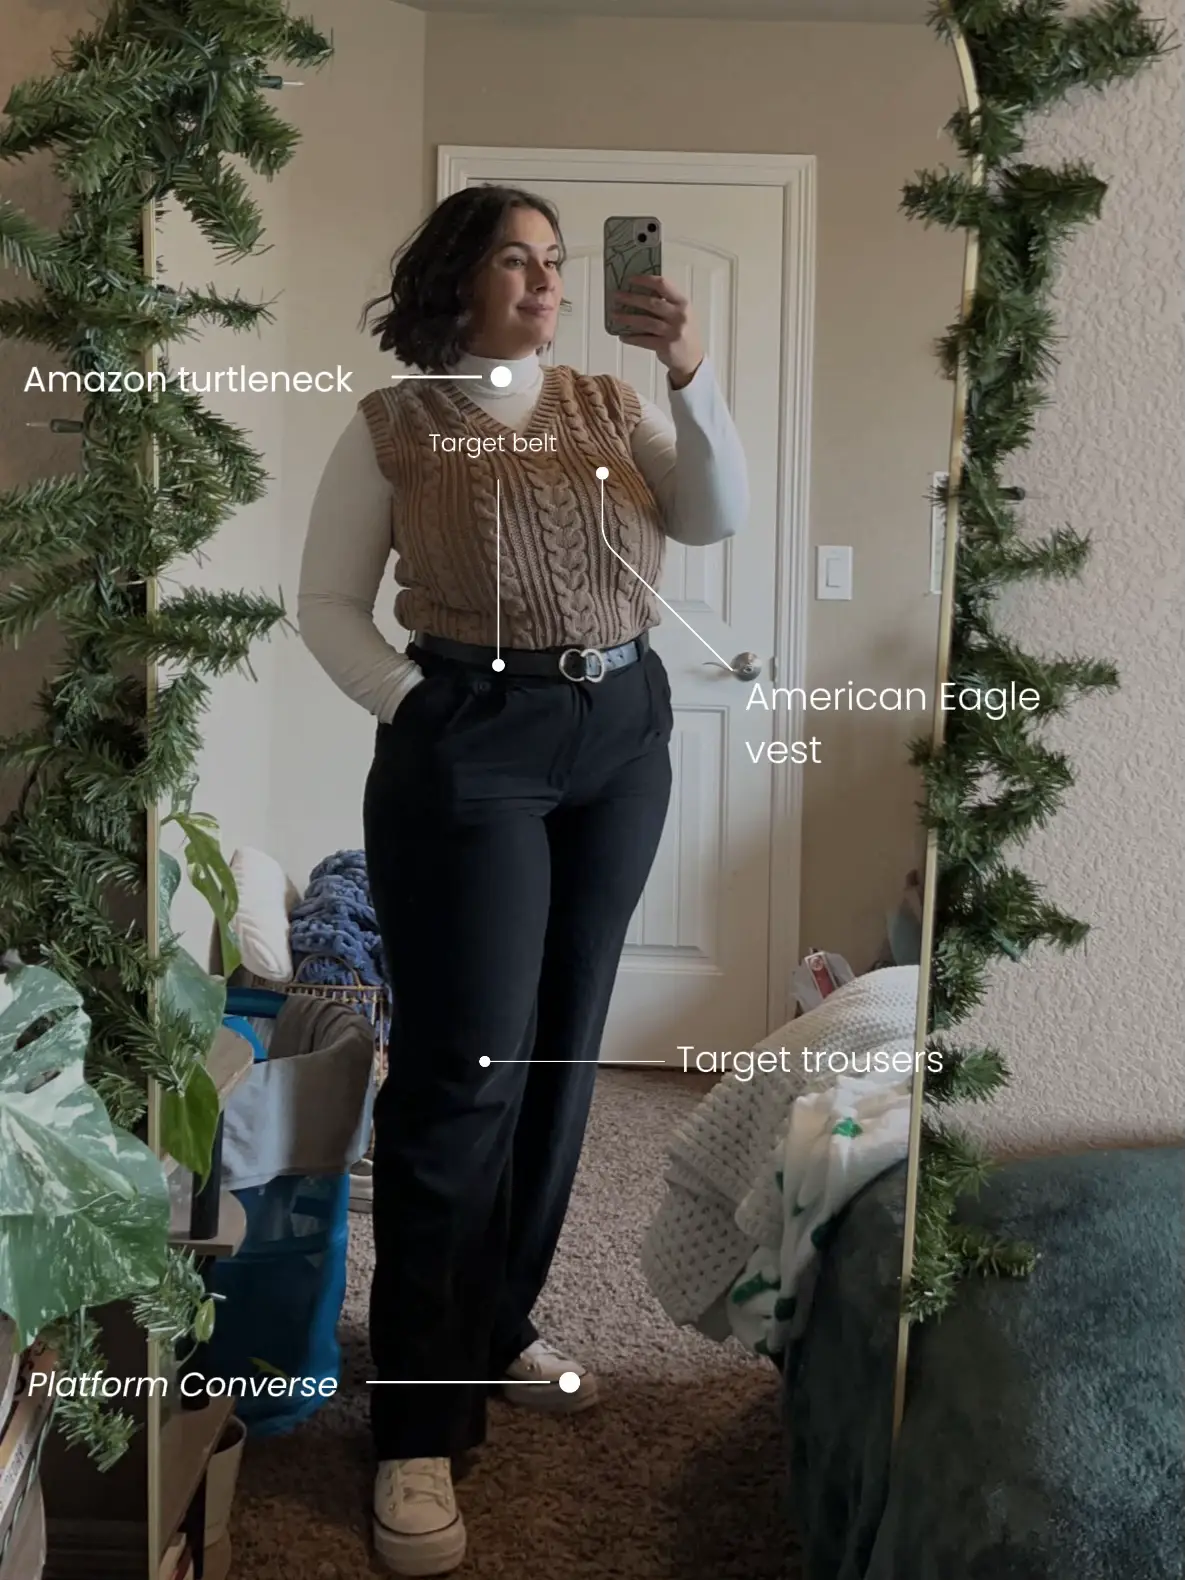 ootd, curvy outfit Inspo, Video published by Okitsmeena